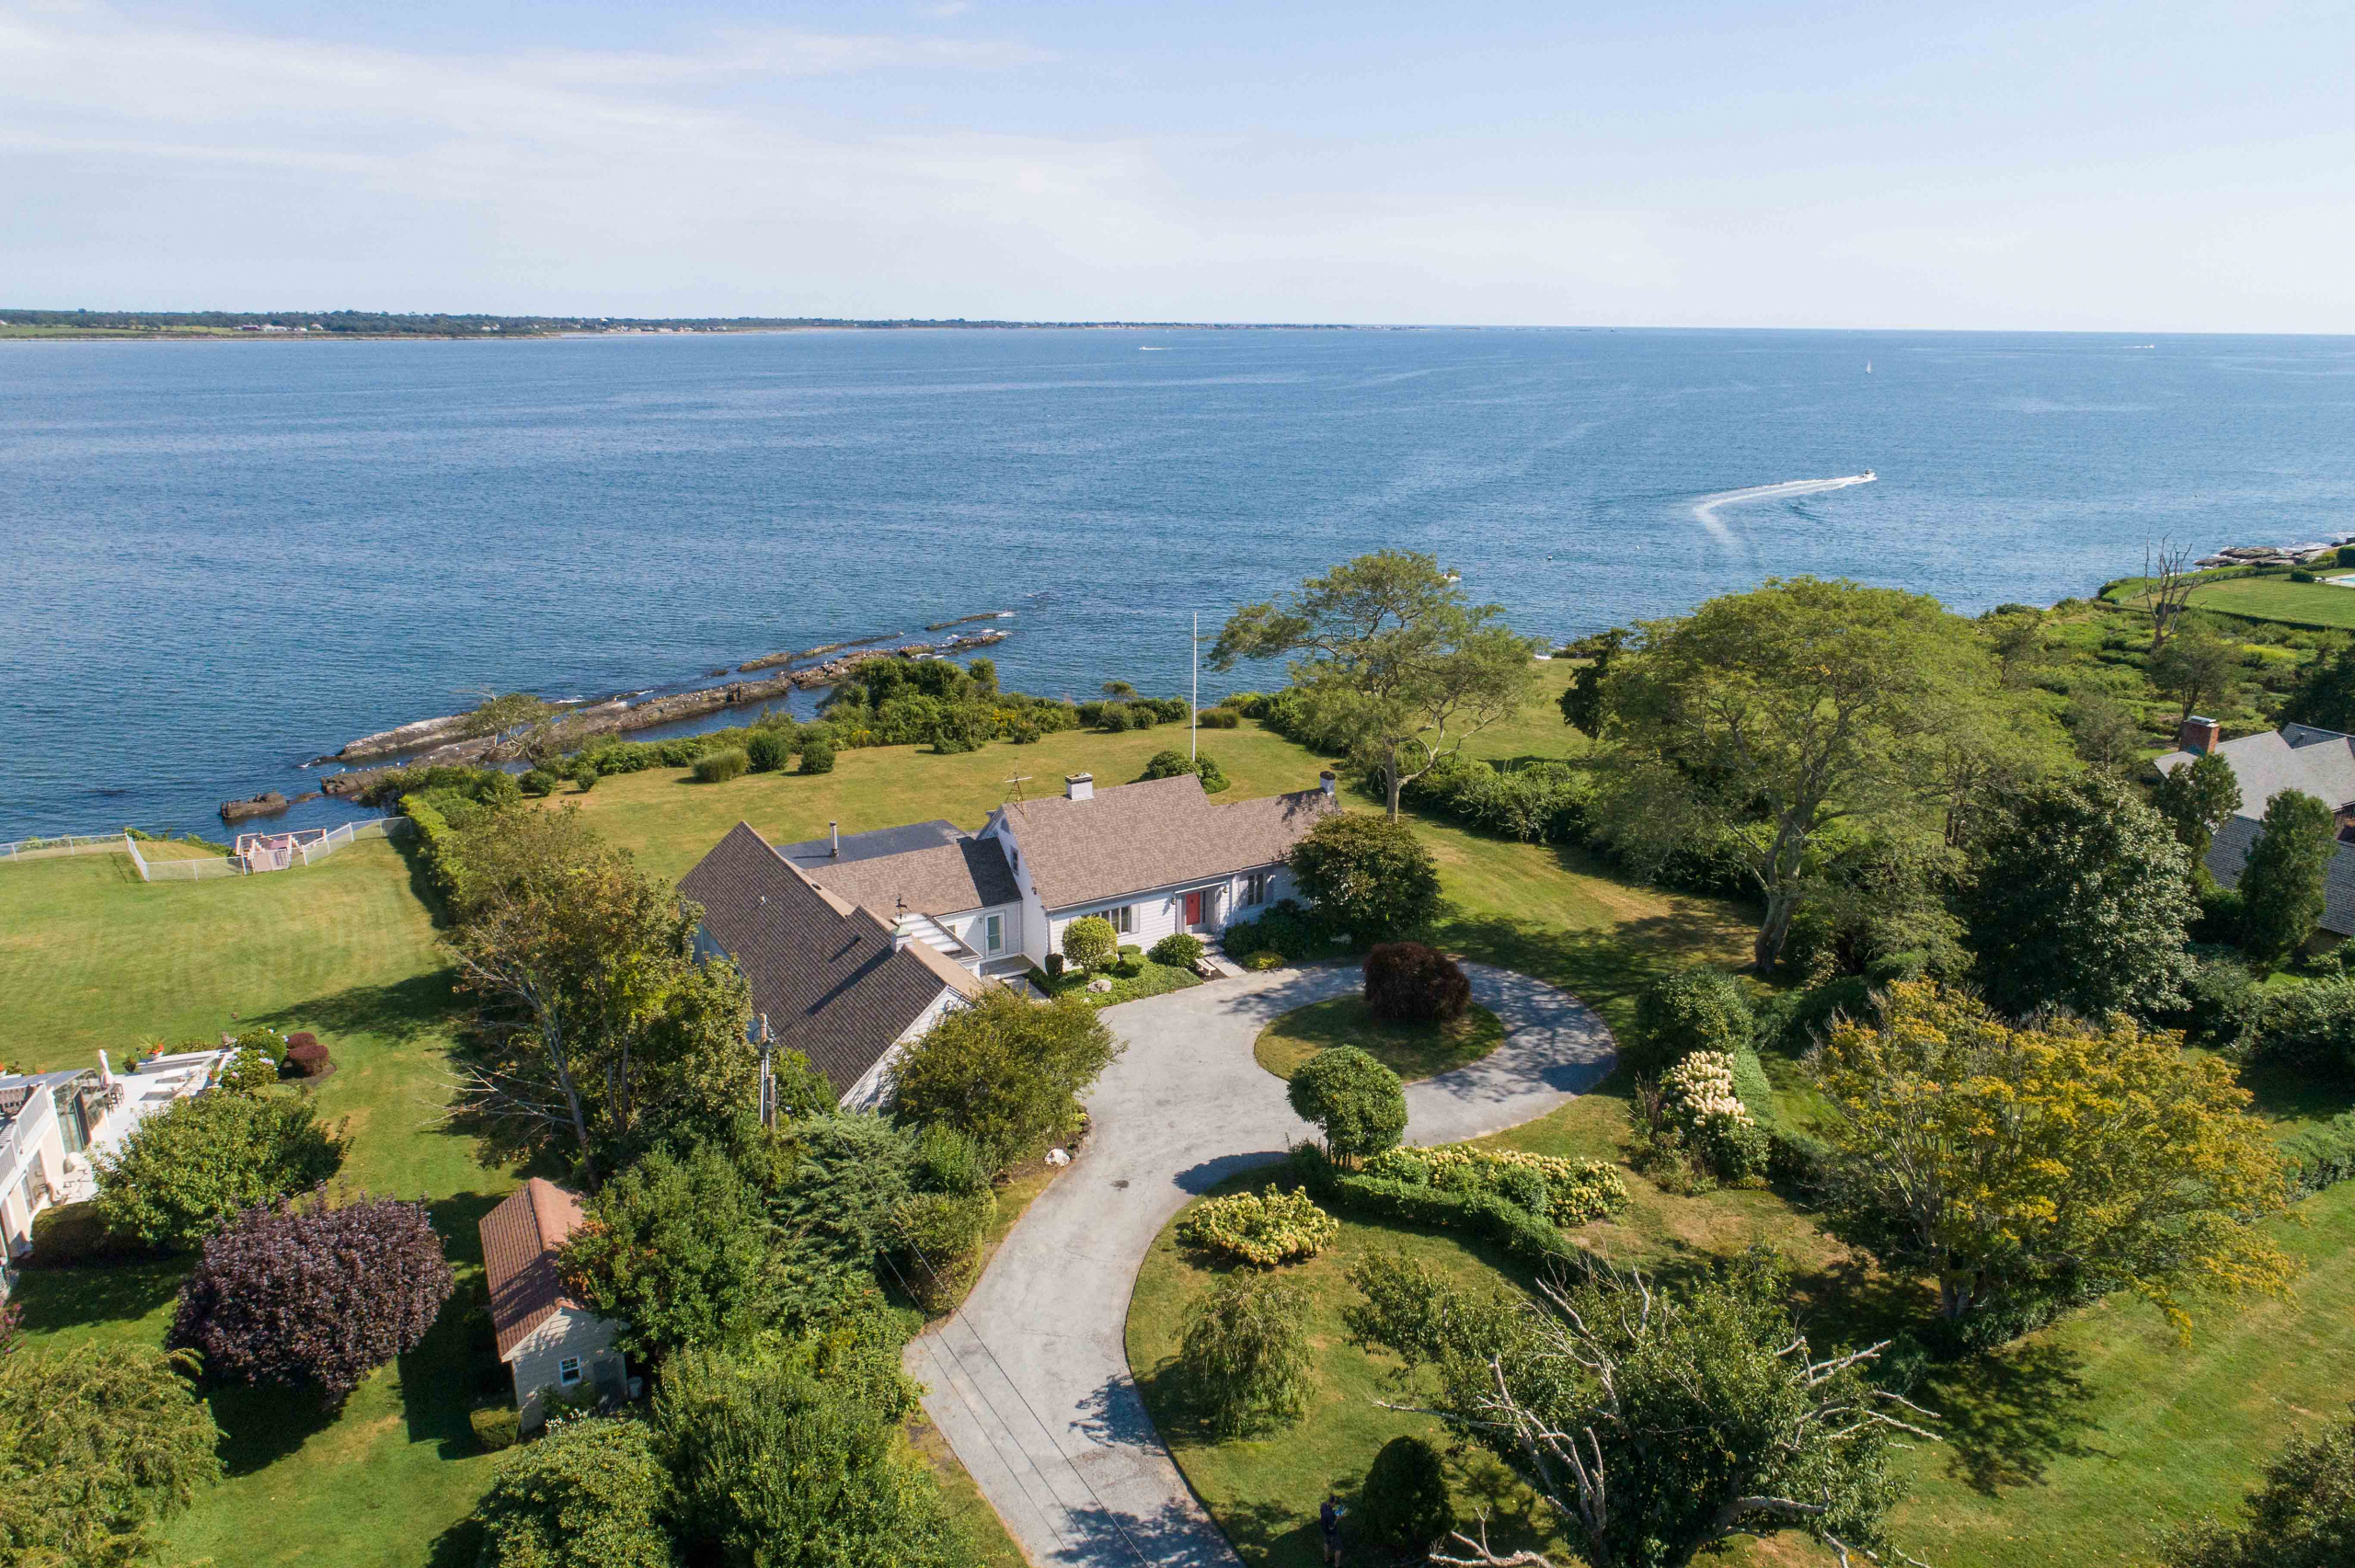 ALEX THURSBY SELLS 2.4 WATERFRONT ACRES WITH EXISTING HOME ON MIDDLETOWN’S INDIAN AVENUE FOR $2,700,000